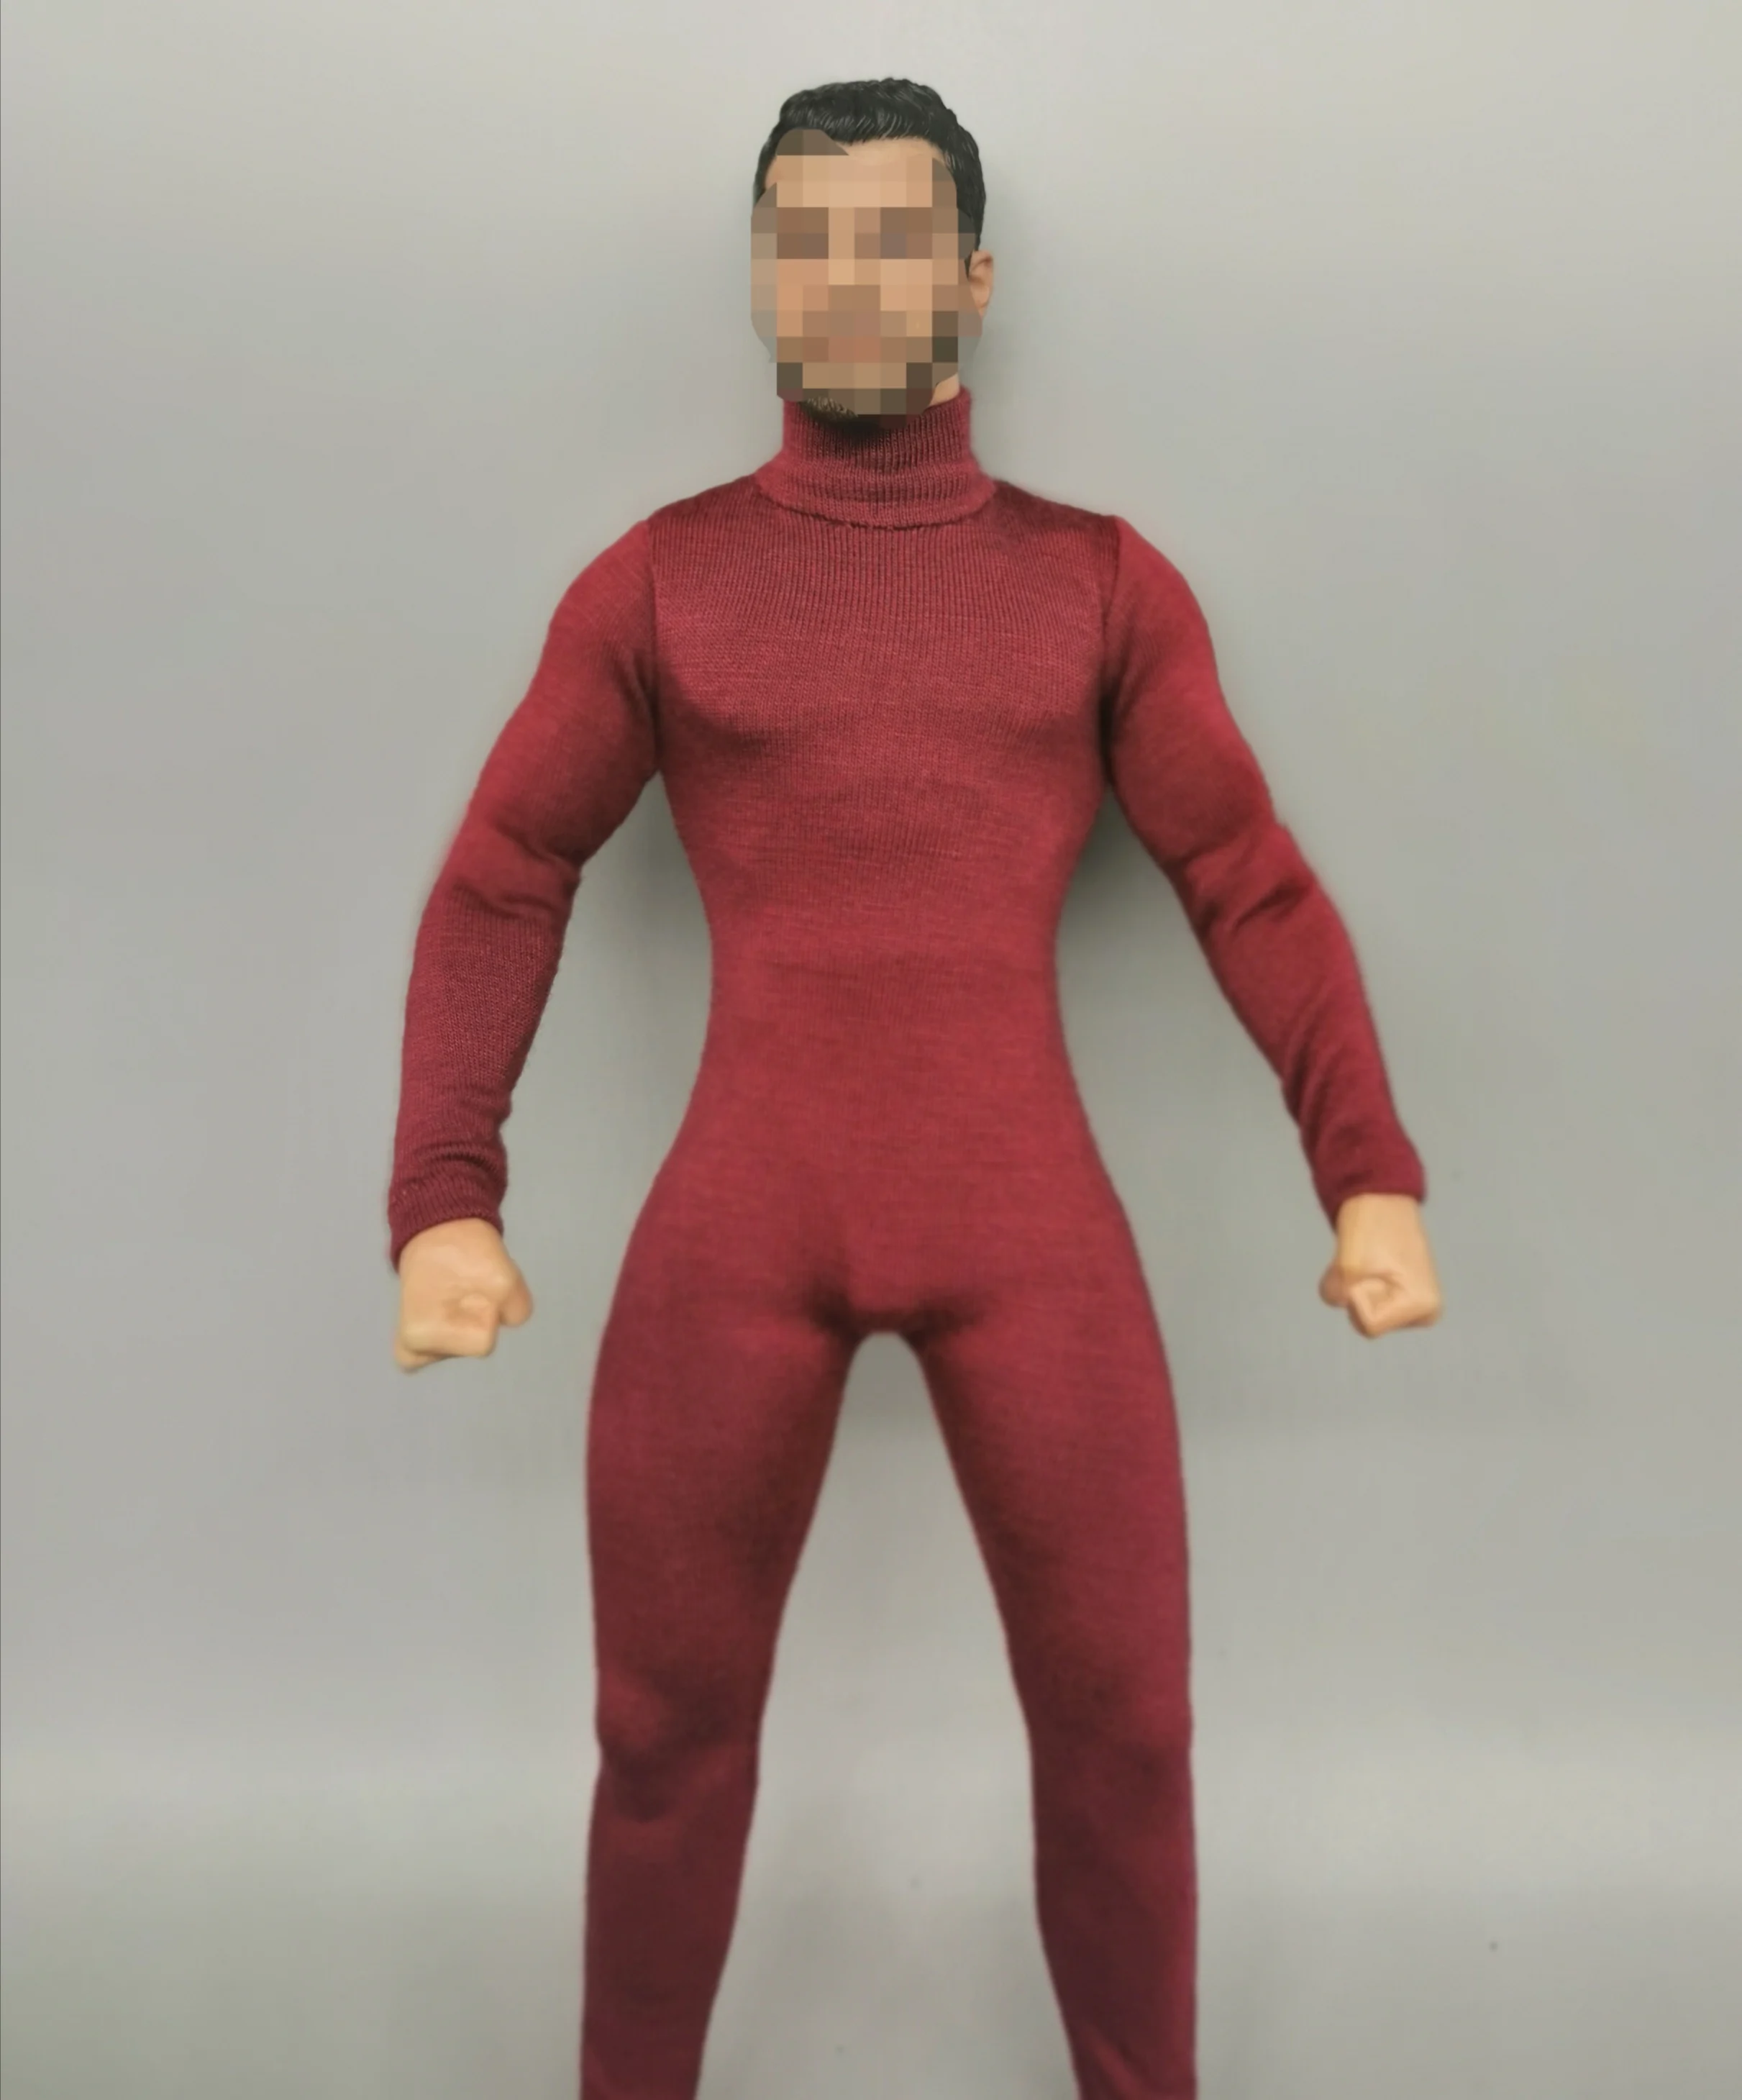 1/6 Scale Red Pants for 12" Action Figure Toys 